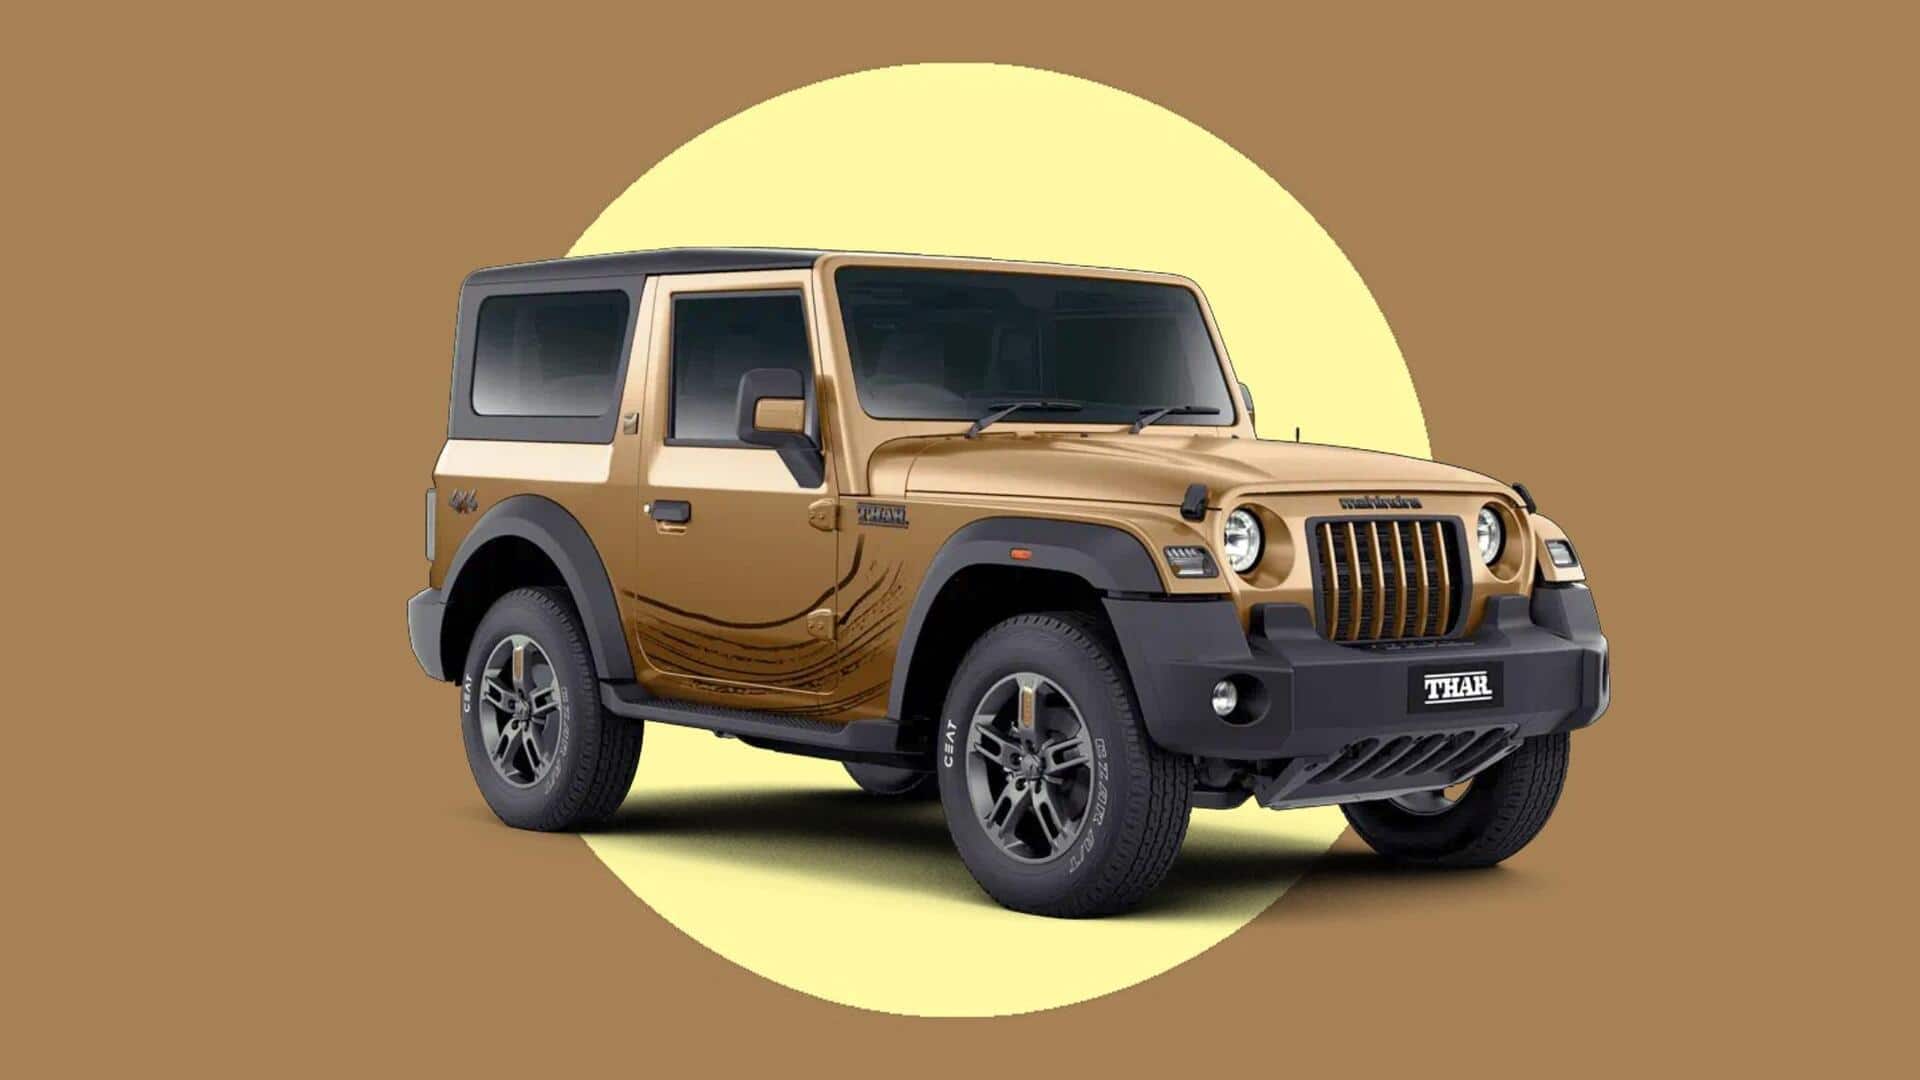 Mahindra to launch Thar five-door SUV this Independence Day